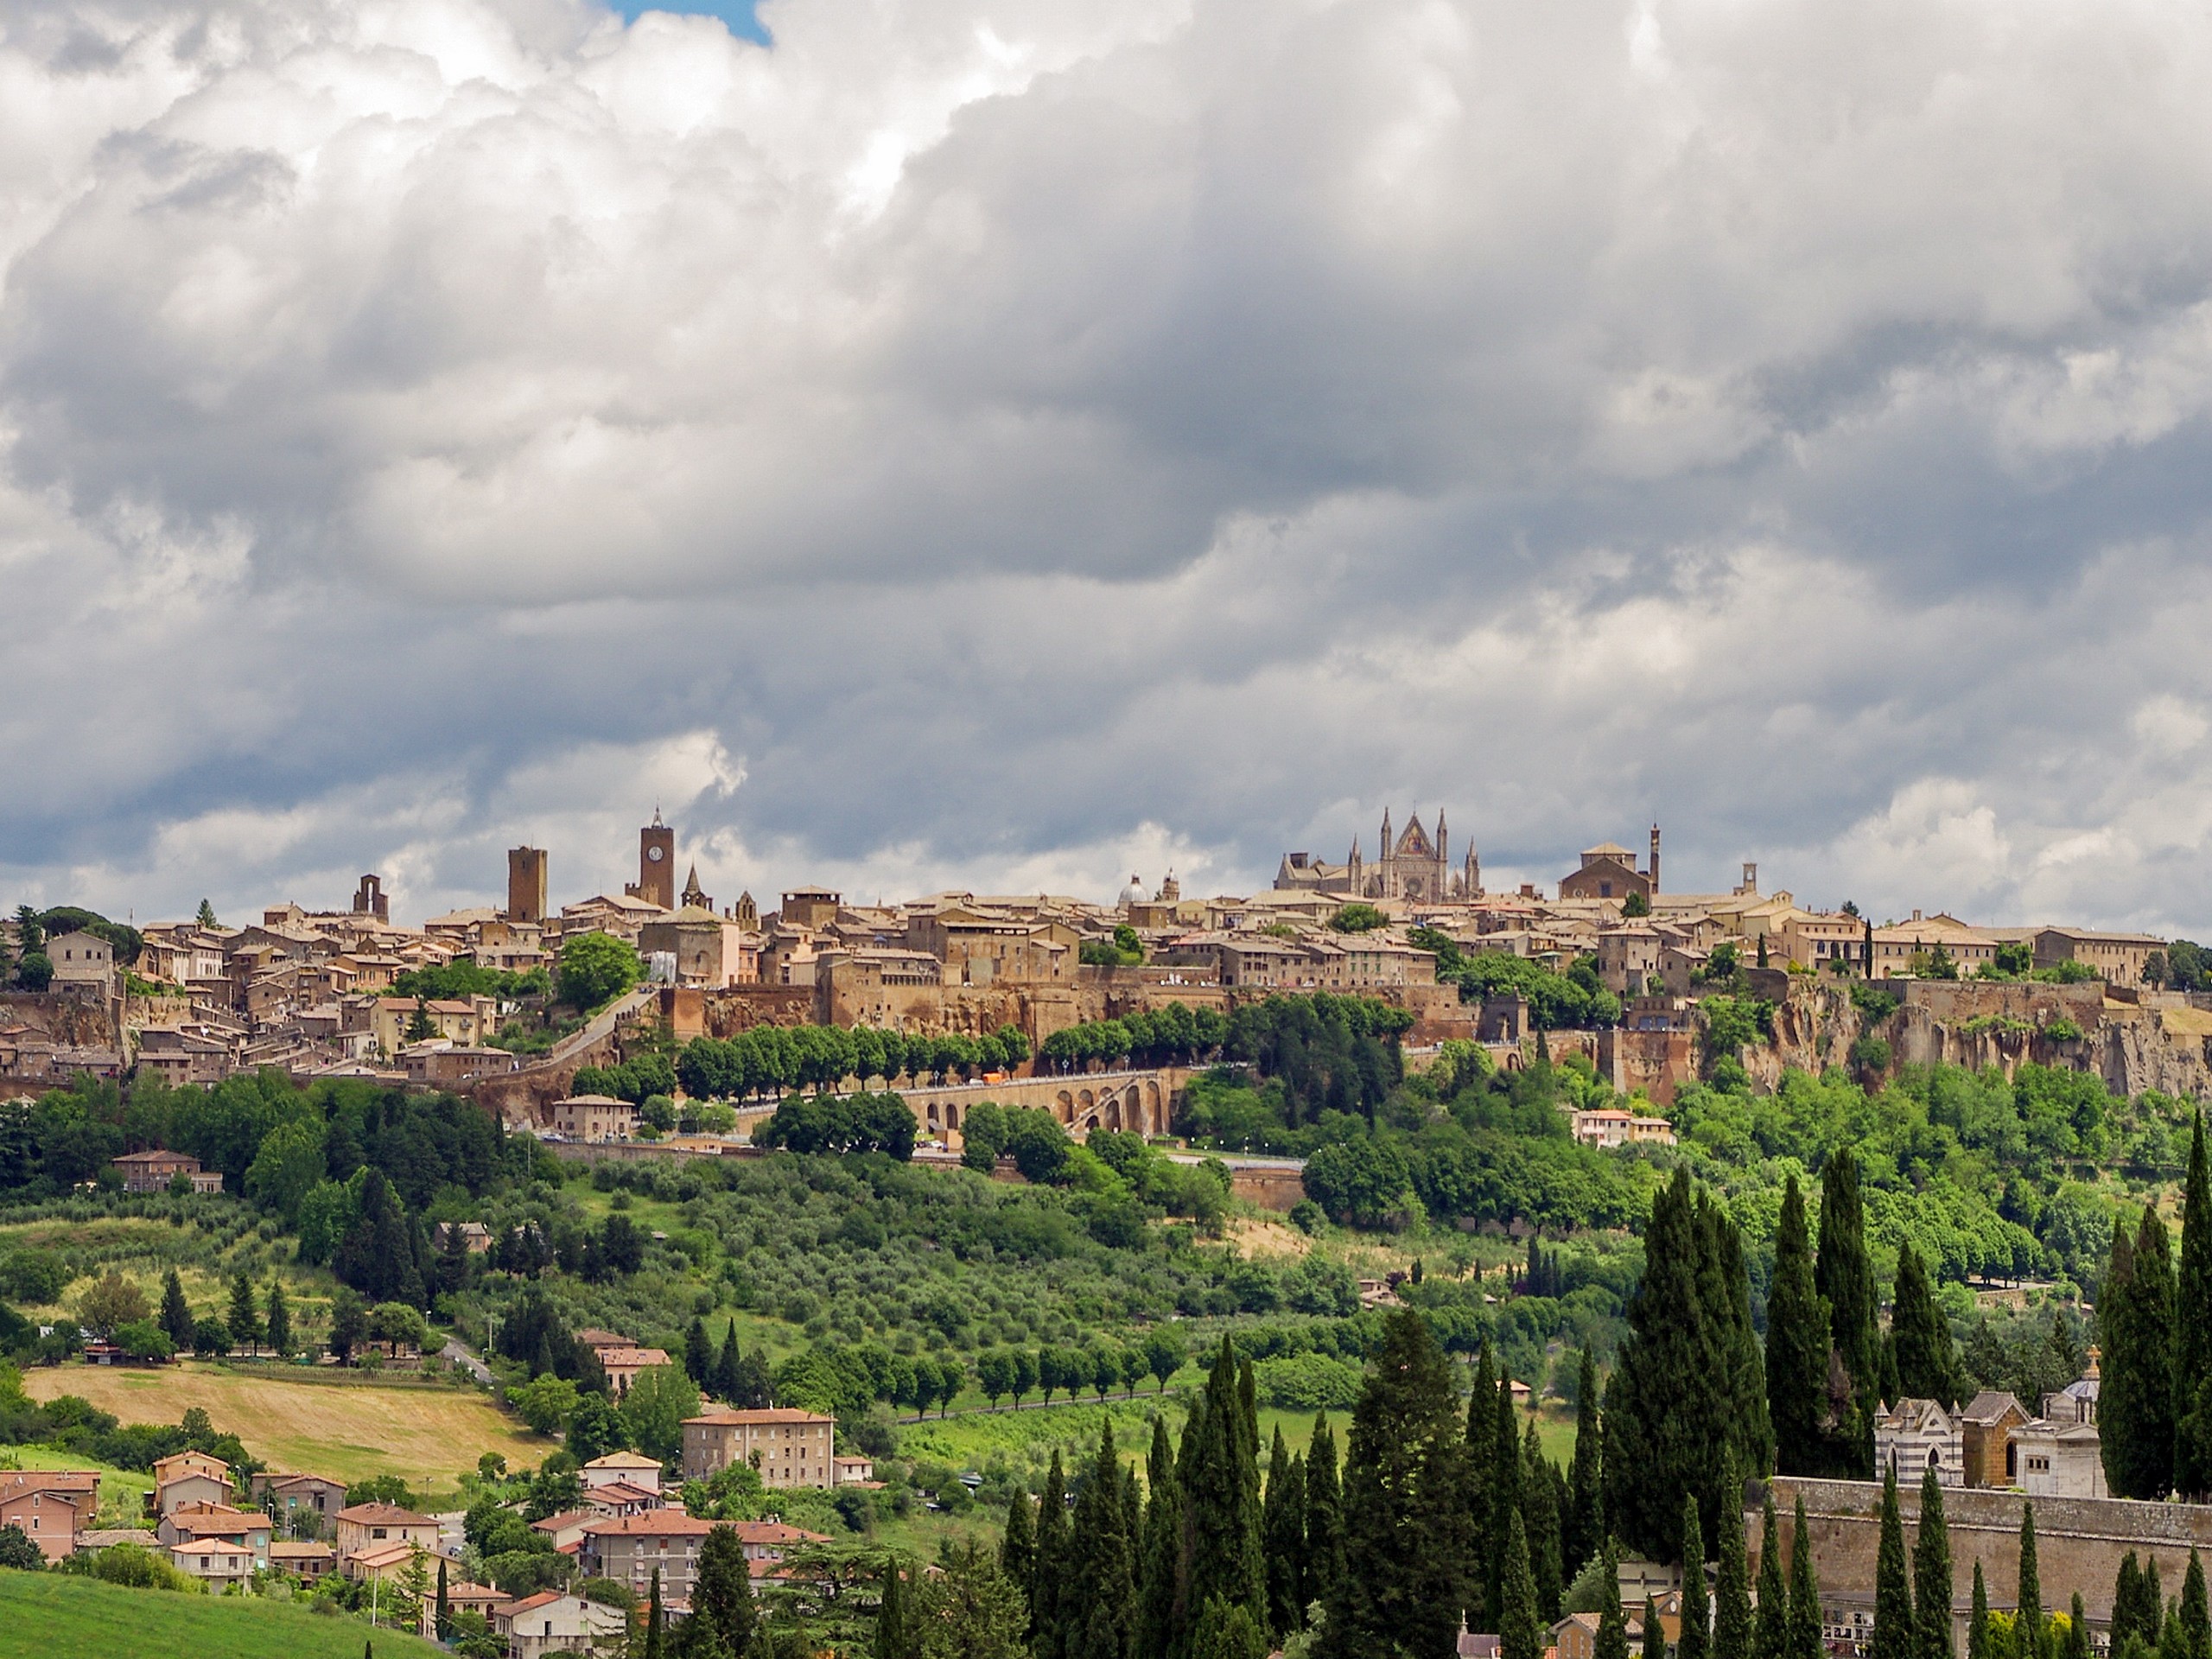 Orivieto (Italy) as seen from afar